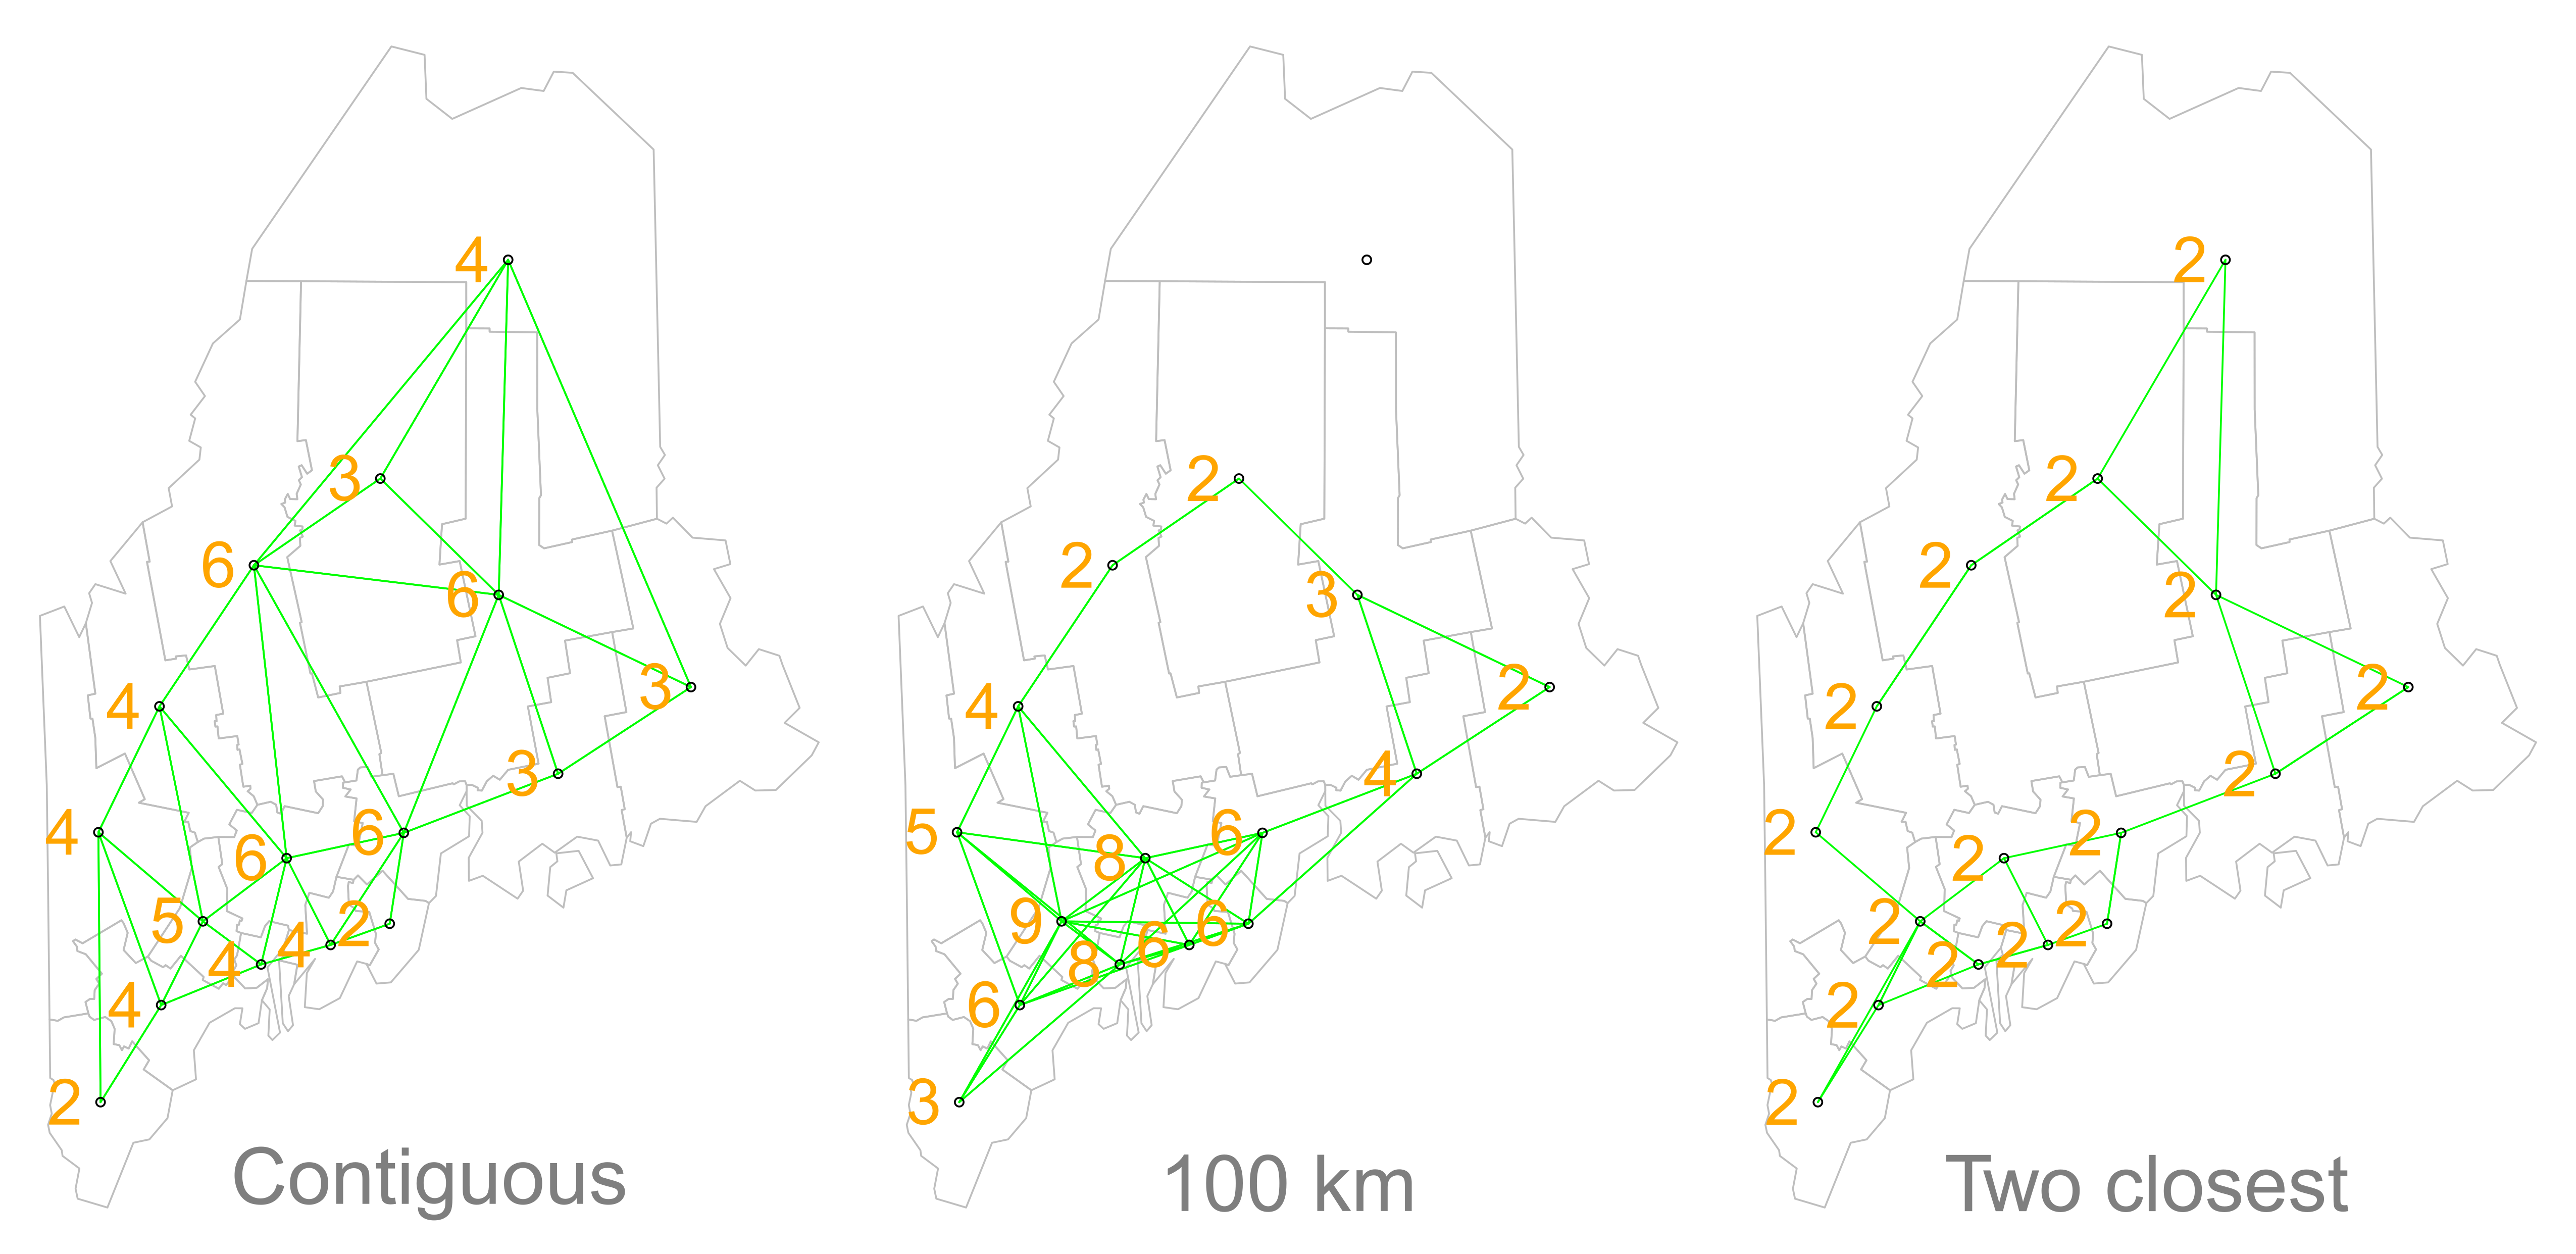 Maps show the links between each polygon and their respective neighbor(s) based on the neighborhood definition. A contiguous neighbor is defined as one that shares a boundary or a vertex with the polygon of interest.  Orange numbers indicate the number of neighbors for each polygon. Note that the top most county has no neighbors when a neighborhood definition of a 100 km distance band is used (i.e. no centroids are within a 100 km search radius)